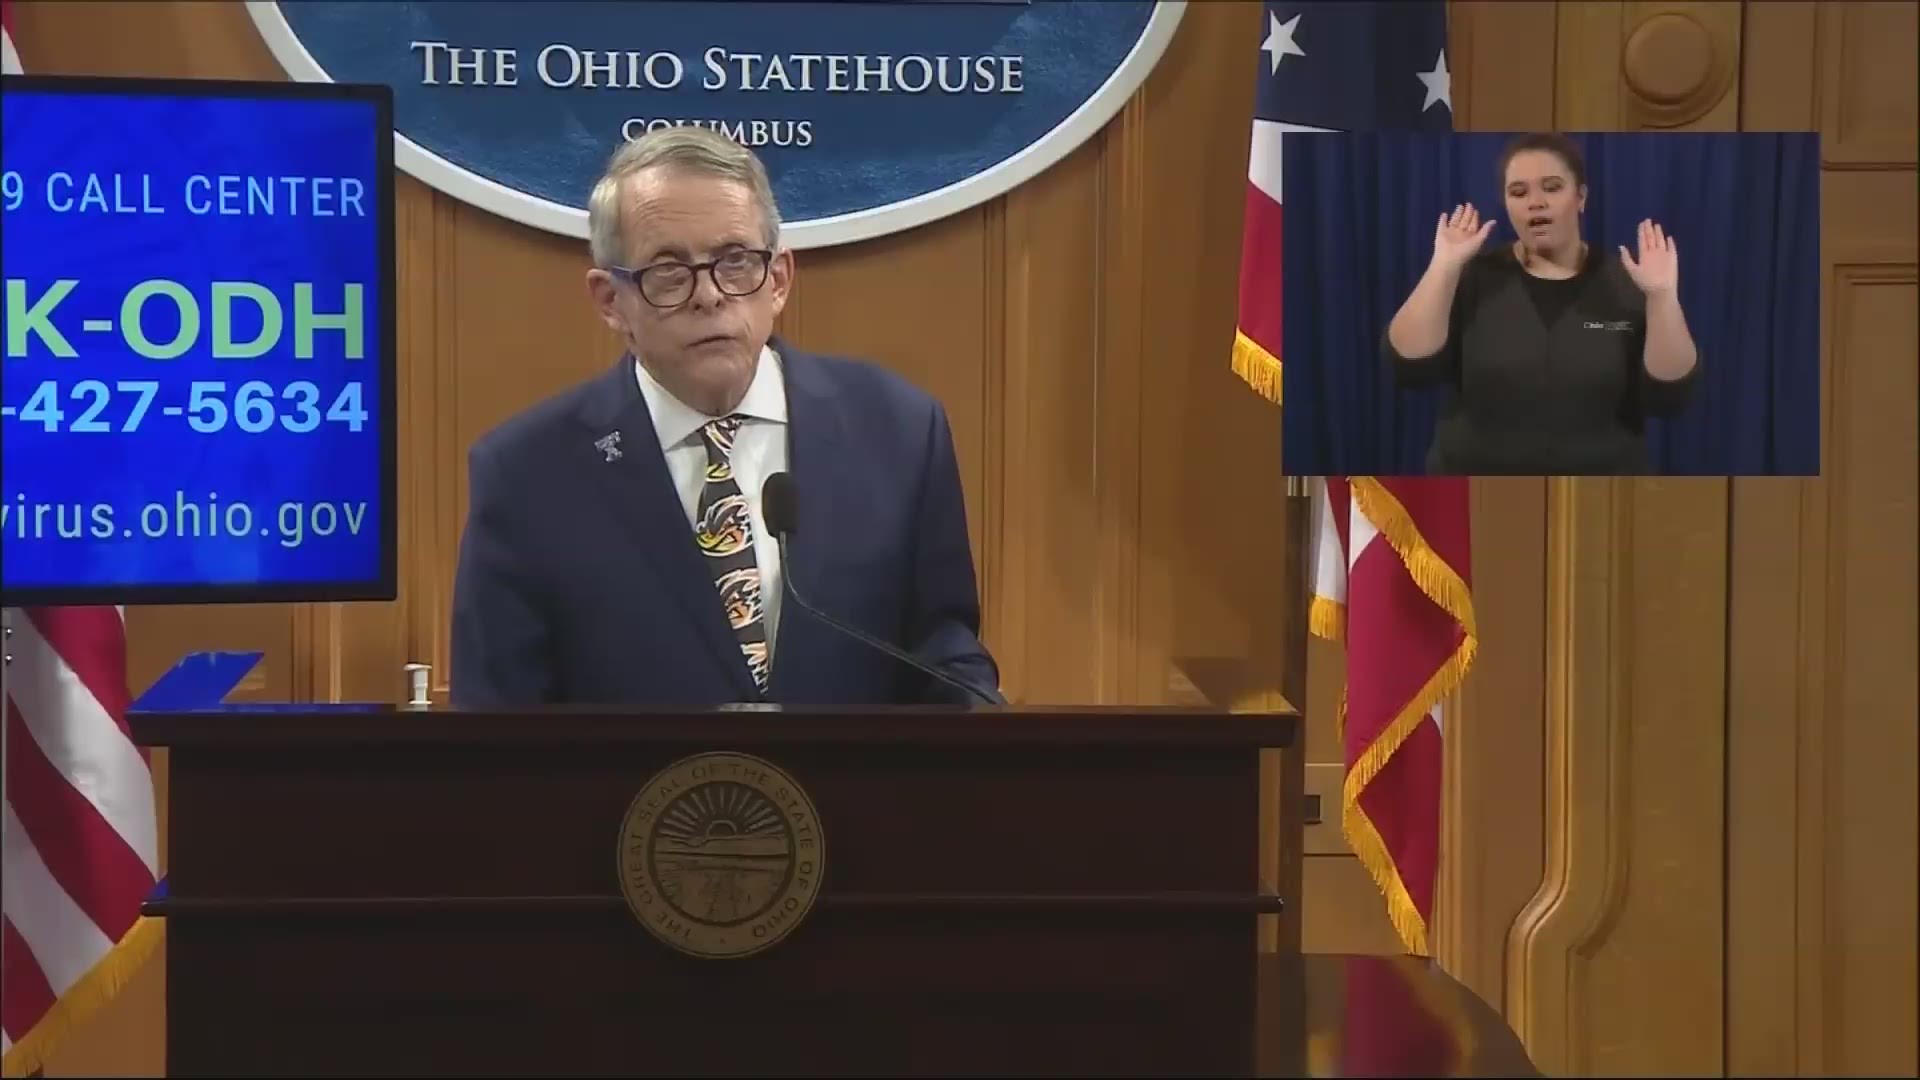 "Just watch what I do and what the state does.  Throughout this, we have been exceedingly mindful of human life and protecting the people in the state of Ohio."